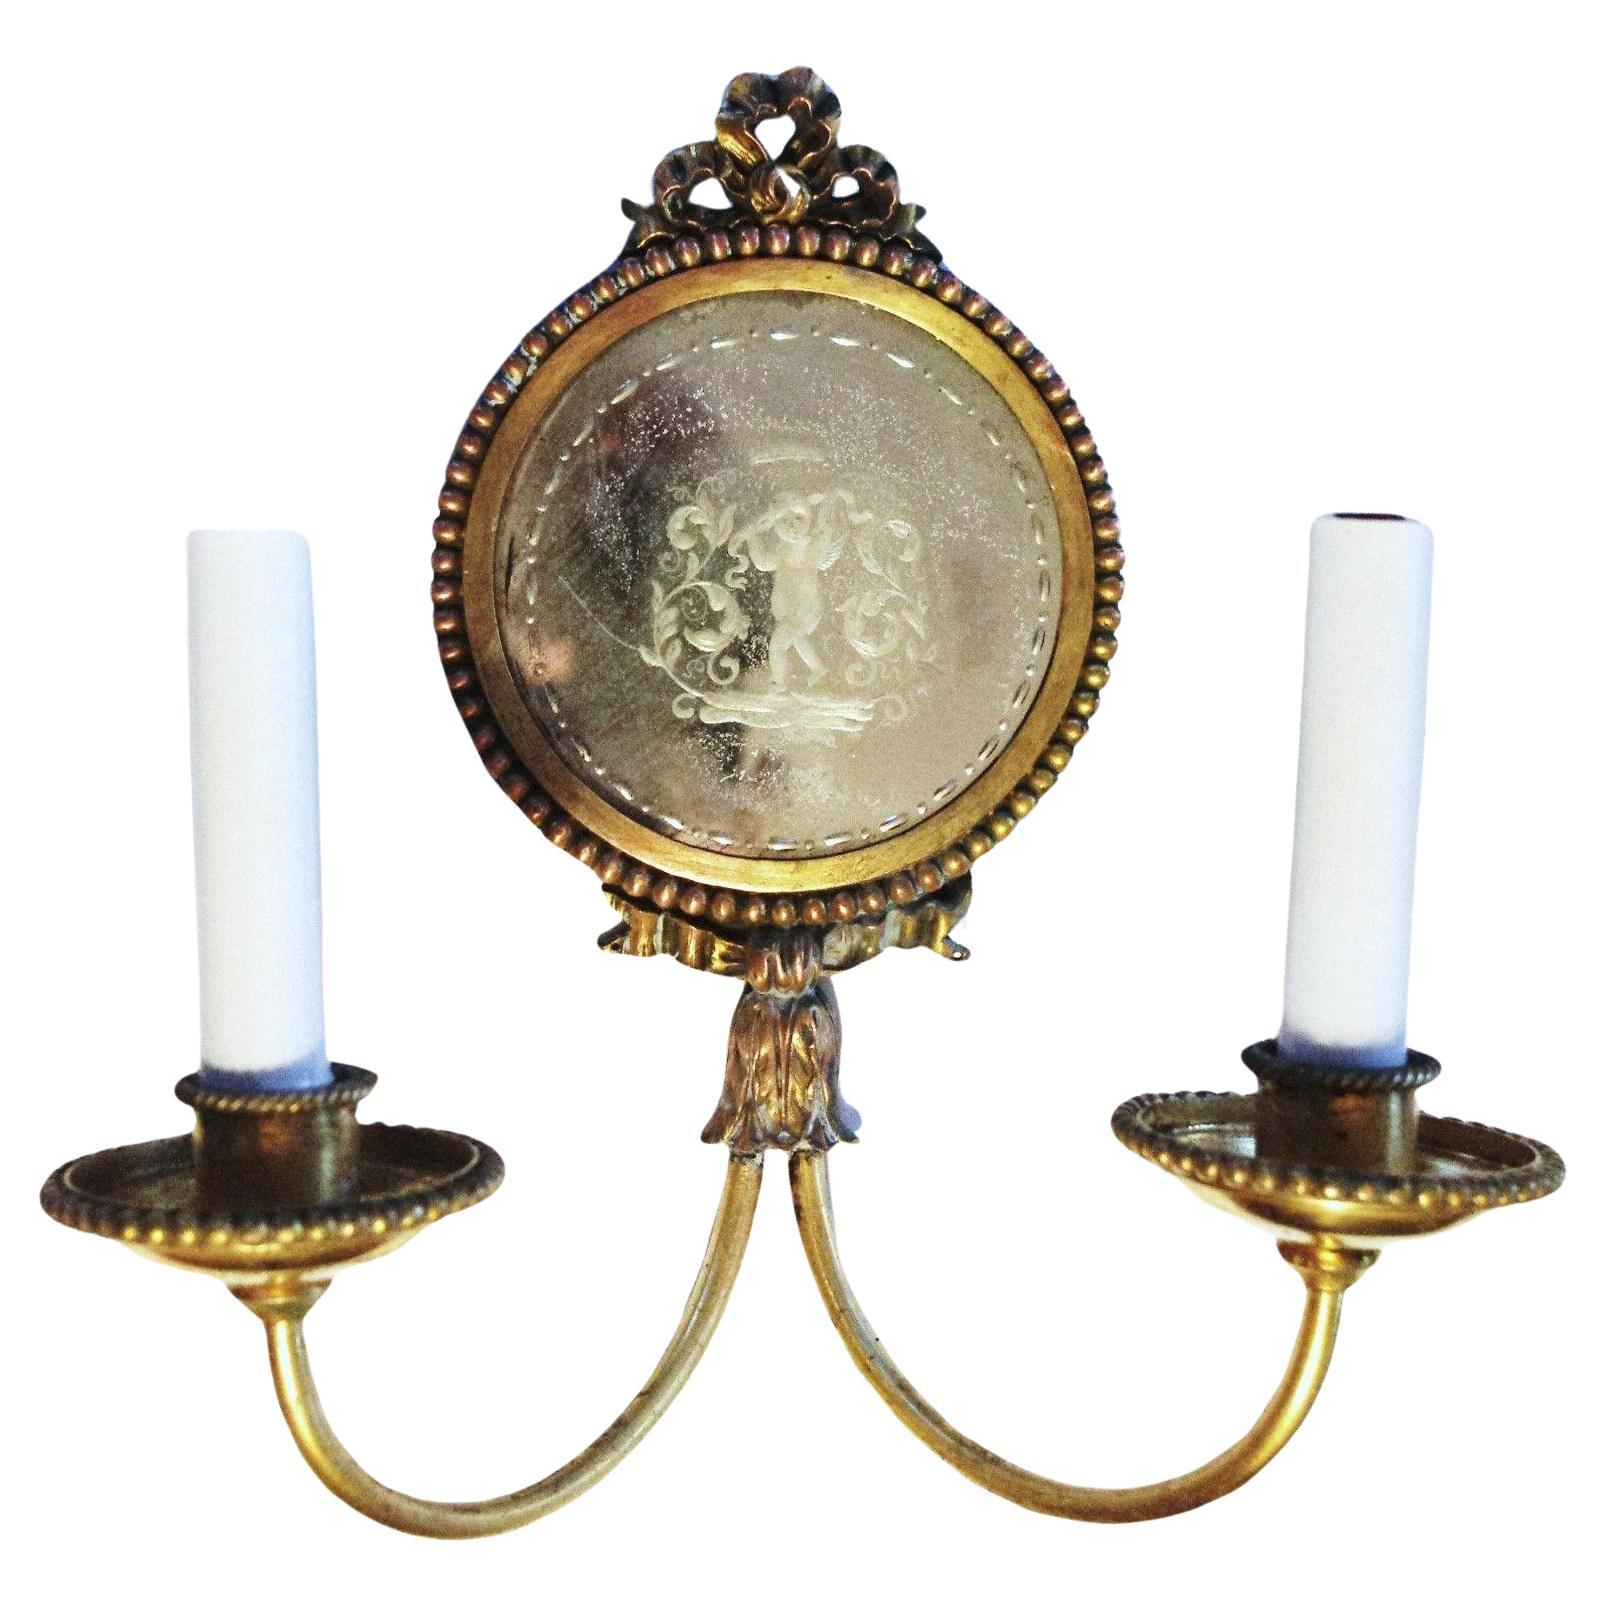 Pair c1890 Neoclassical style Bronze Wall Sconces Featuring Carved Back Eglomise Mirrored Wall Sconces. Signed by E.F. Caldwell. The cherubs are so sweetly rendered. One facing to the left and one facing front.